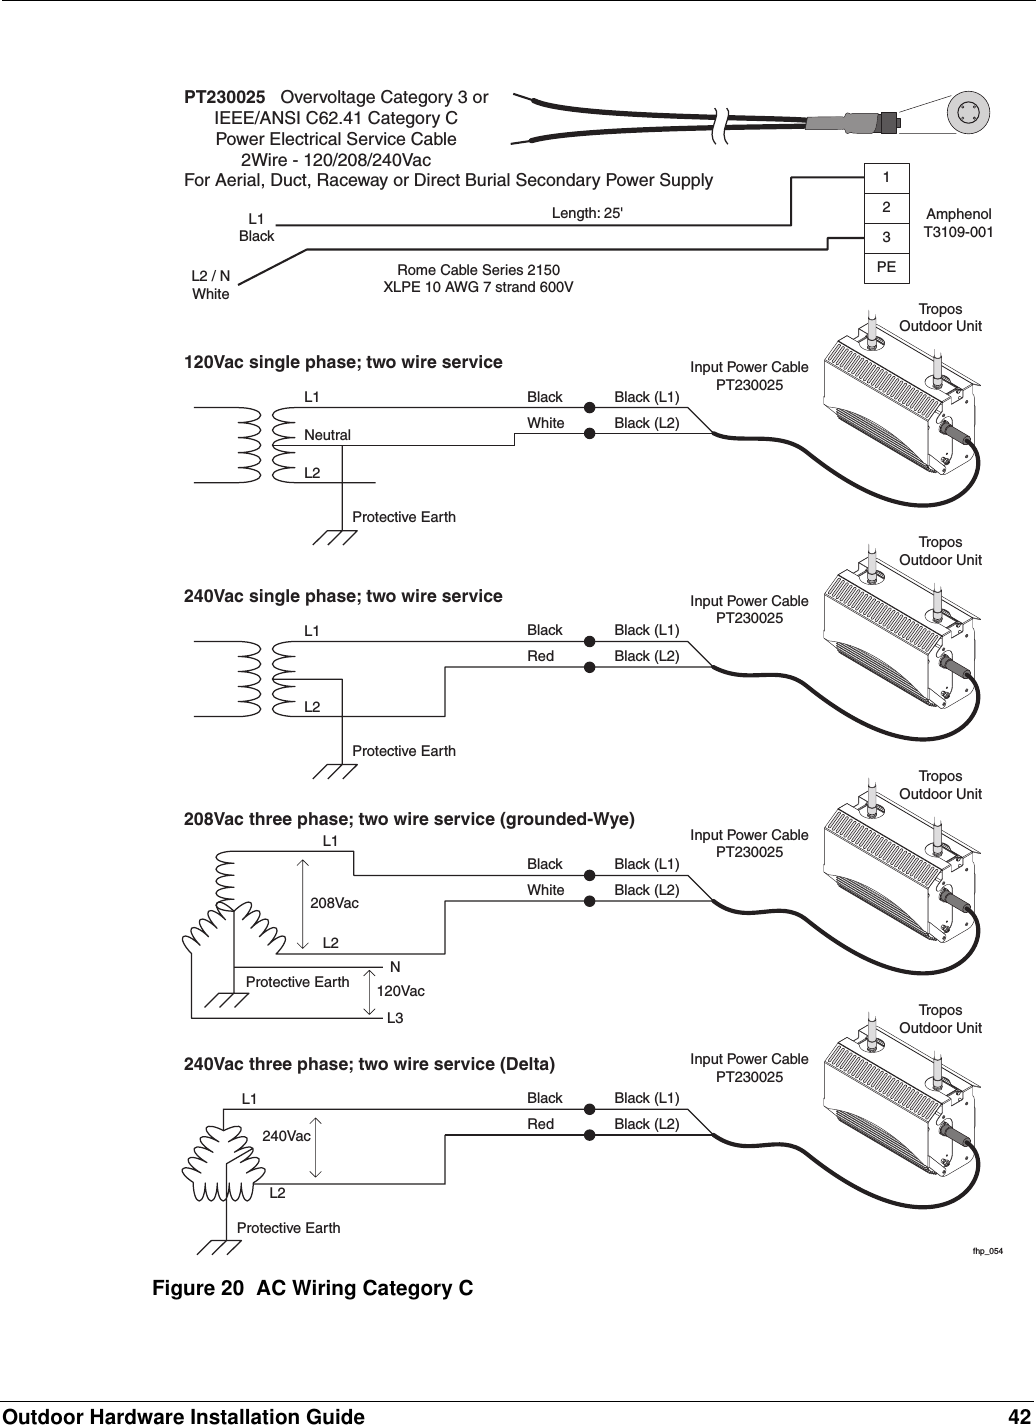 Outdoor Hardware Installation Guide 42Figure 20  AC Wiring Category CPEPT230025   Overvoltage Category 3 orIEEE/ANSI C62.41 Category CPower Electrical Service Cable2Wire - 120/208/240VacFor Aerial, Duct, Raceway or Direct Burial Secondary Power SupplyRome Cable Series 2150XLPE 10 AWG 7 strand 600VAmphenolT3109-001L1BlackL2 / NWhite321fhp_054120Vac single phase; two wire serviceL1NeutralBlackWhiteBlack (L1)Black (L2)Protective EarthL2Input Power CablePT230025TroposOutdoor Unit240Vac single phase; two wire serviceL1 BlackRedBlack (L1)Black (L2)Protective EarthL2Input Power CablePT230025TroposOutdoor Unit208Vac three phase; two wire service (grounded-Wye)BlackWhiteBlack (L1)Black (L2)Input Power CablePT230025TroposOutdoor UnitL1Protective EarthL2208Vac120VacNL3240Vac three phase; two wire service (Delta)BlackRedBlack (L1)Black (L2)Input Power CablePT230025TroposOutdoor UnitL1Protective EarthL2240VacLength: 25&apos;